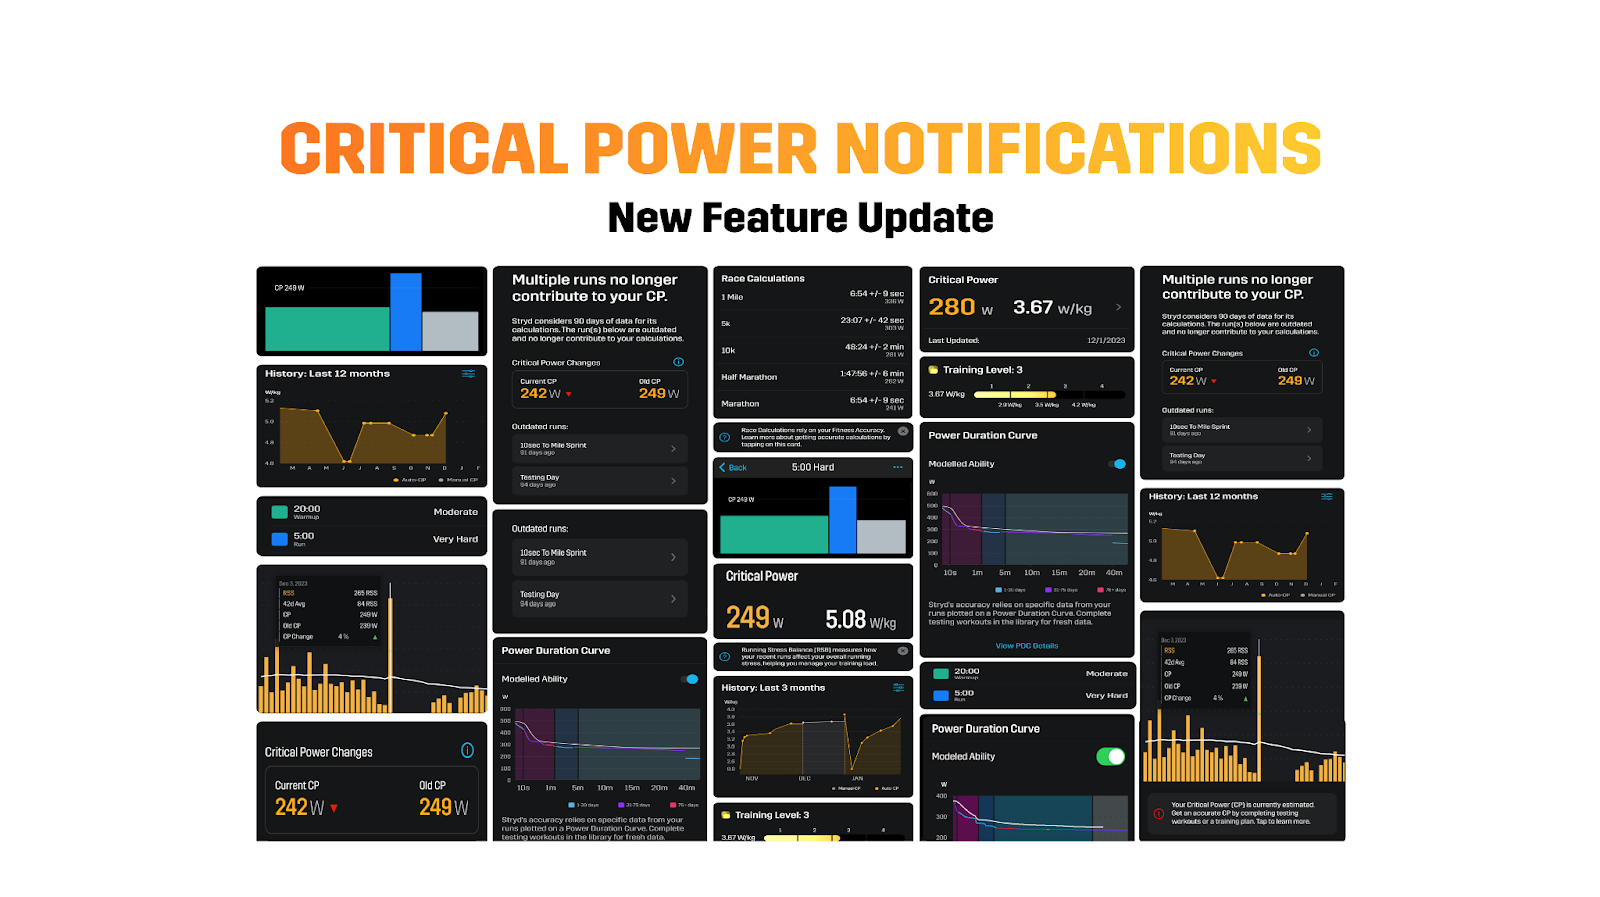 Stay on Top of Your Game with Critical Power Notifications